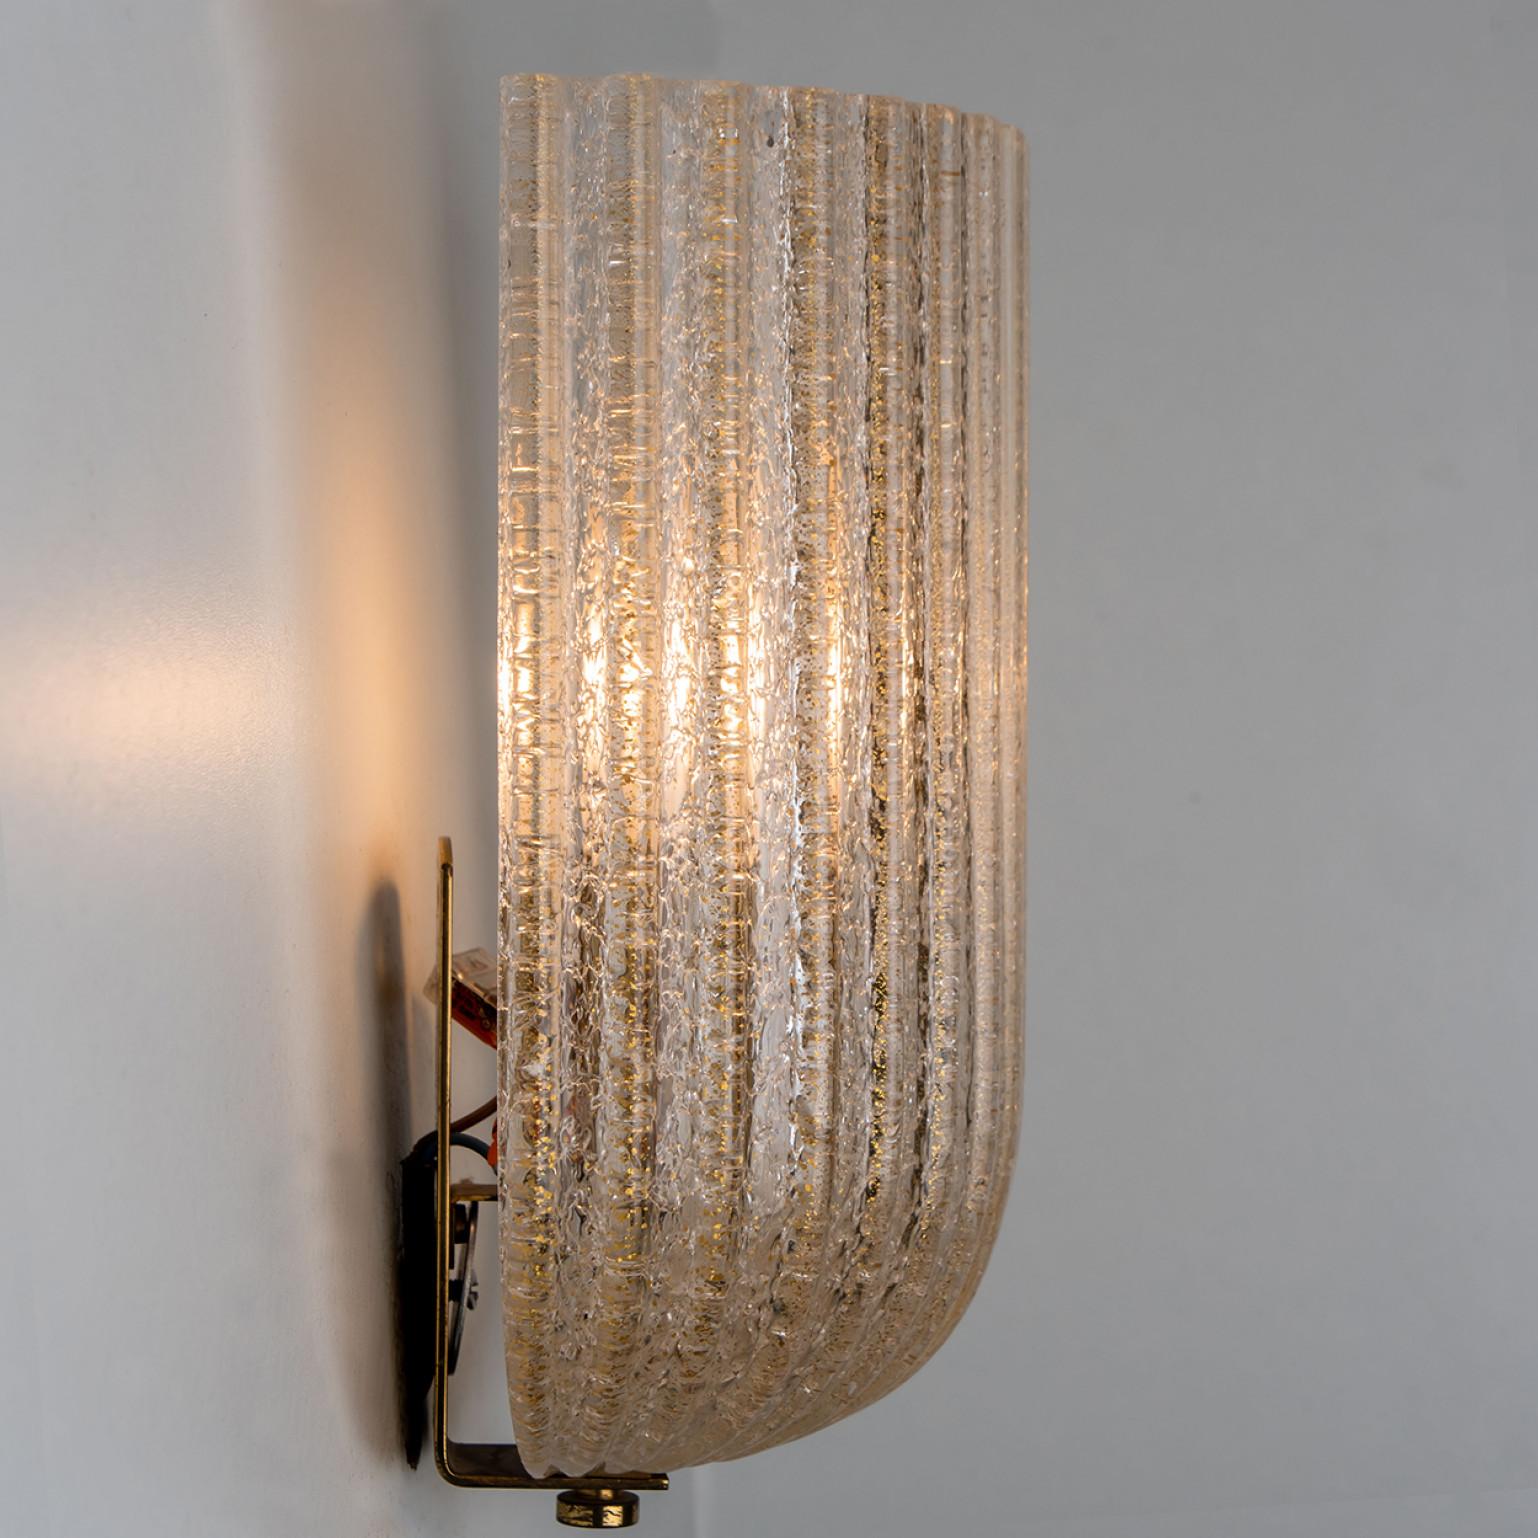 Other 1 of 2 Fluted Murano Glass Wall Sconces Barovier, Italy, 1960s For Sale